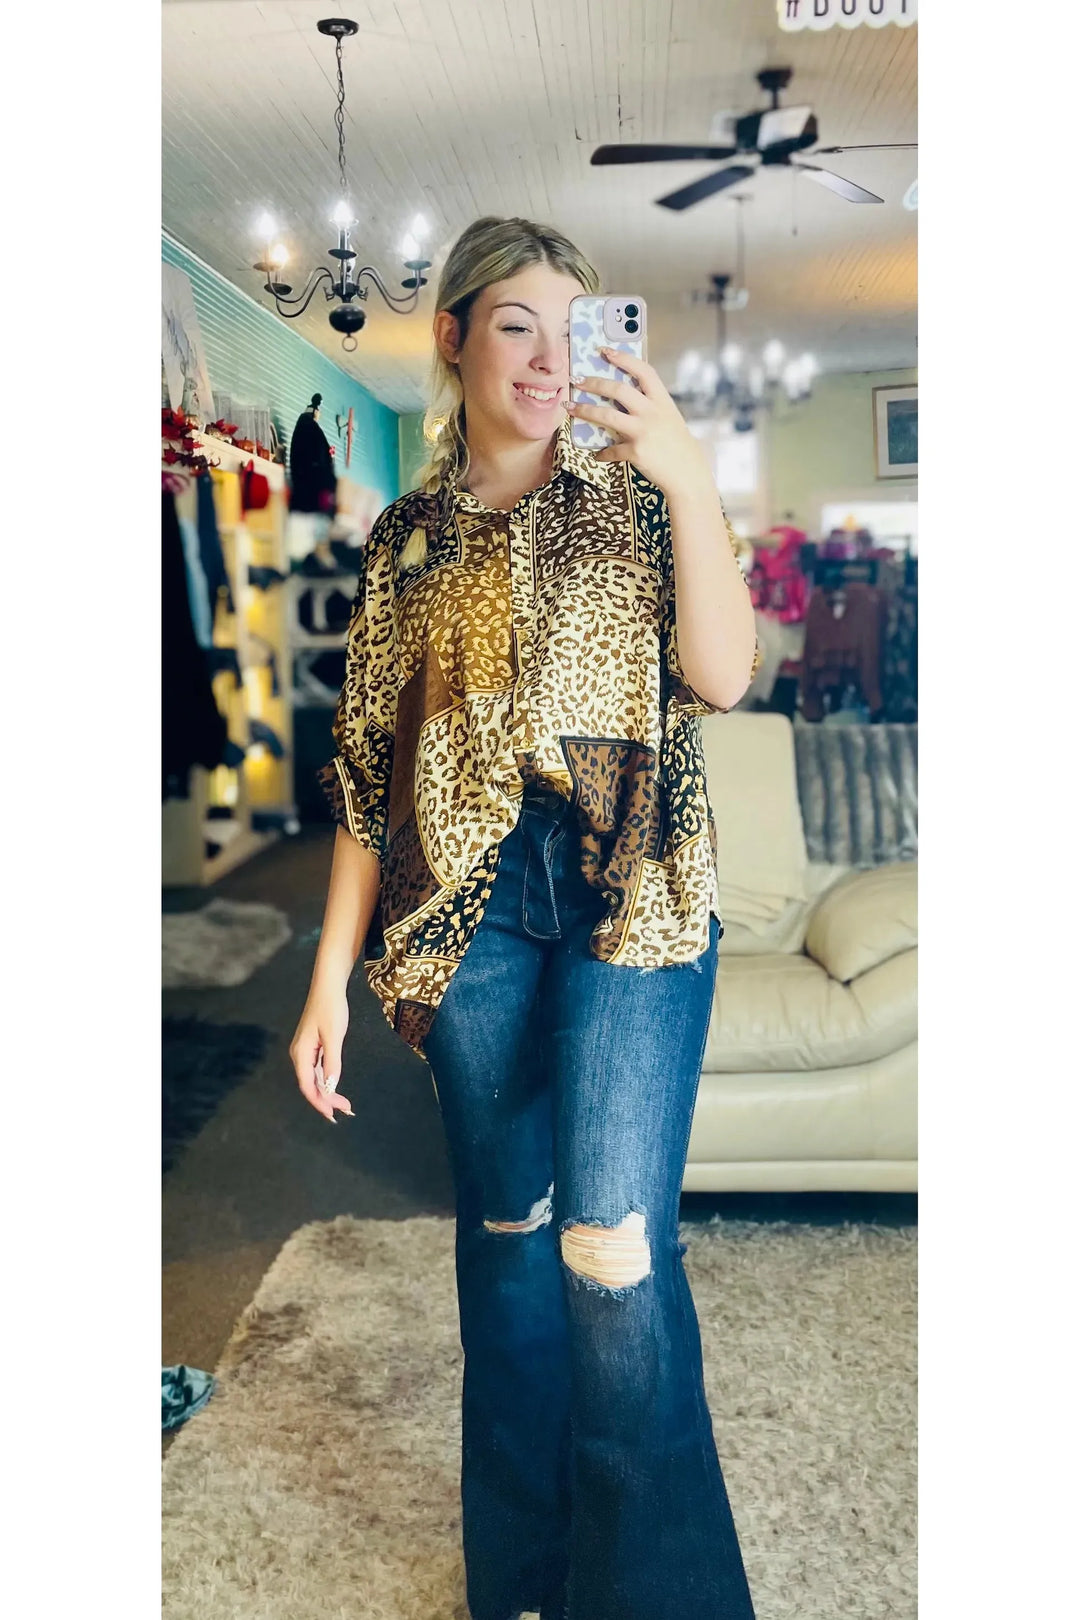 Mix Animal Print  Top - Vintage Dragonfly Boutique